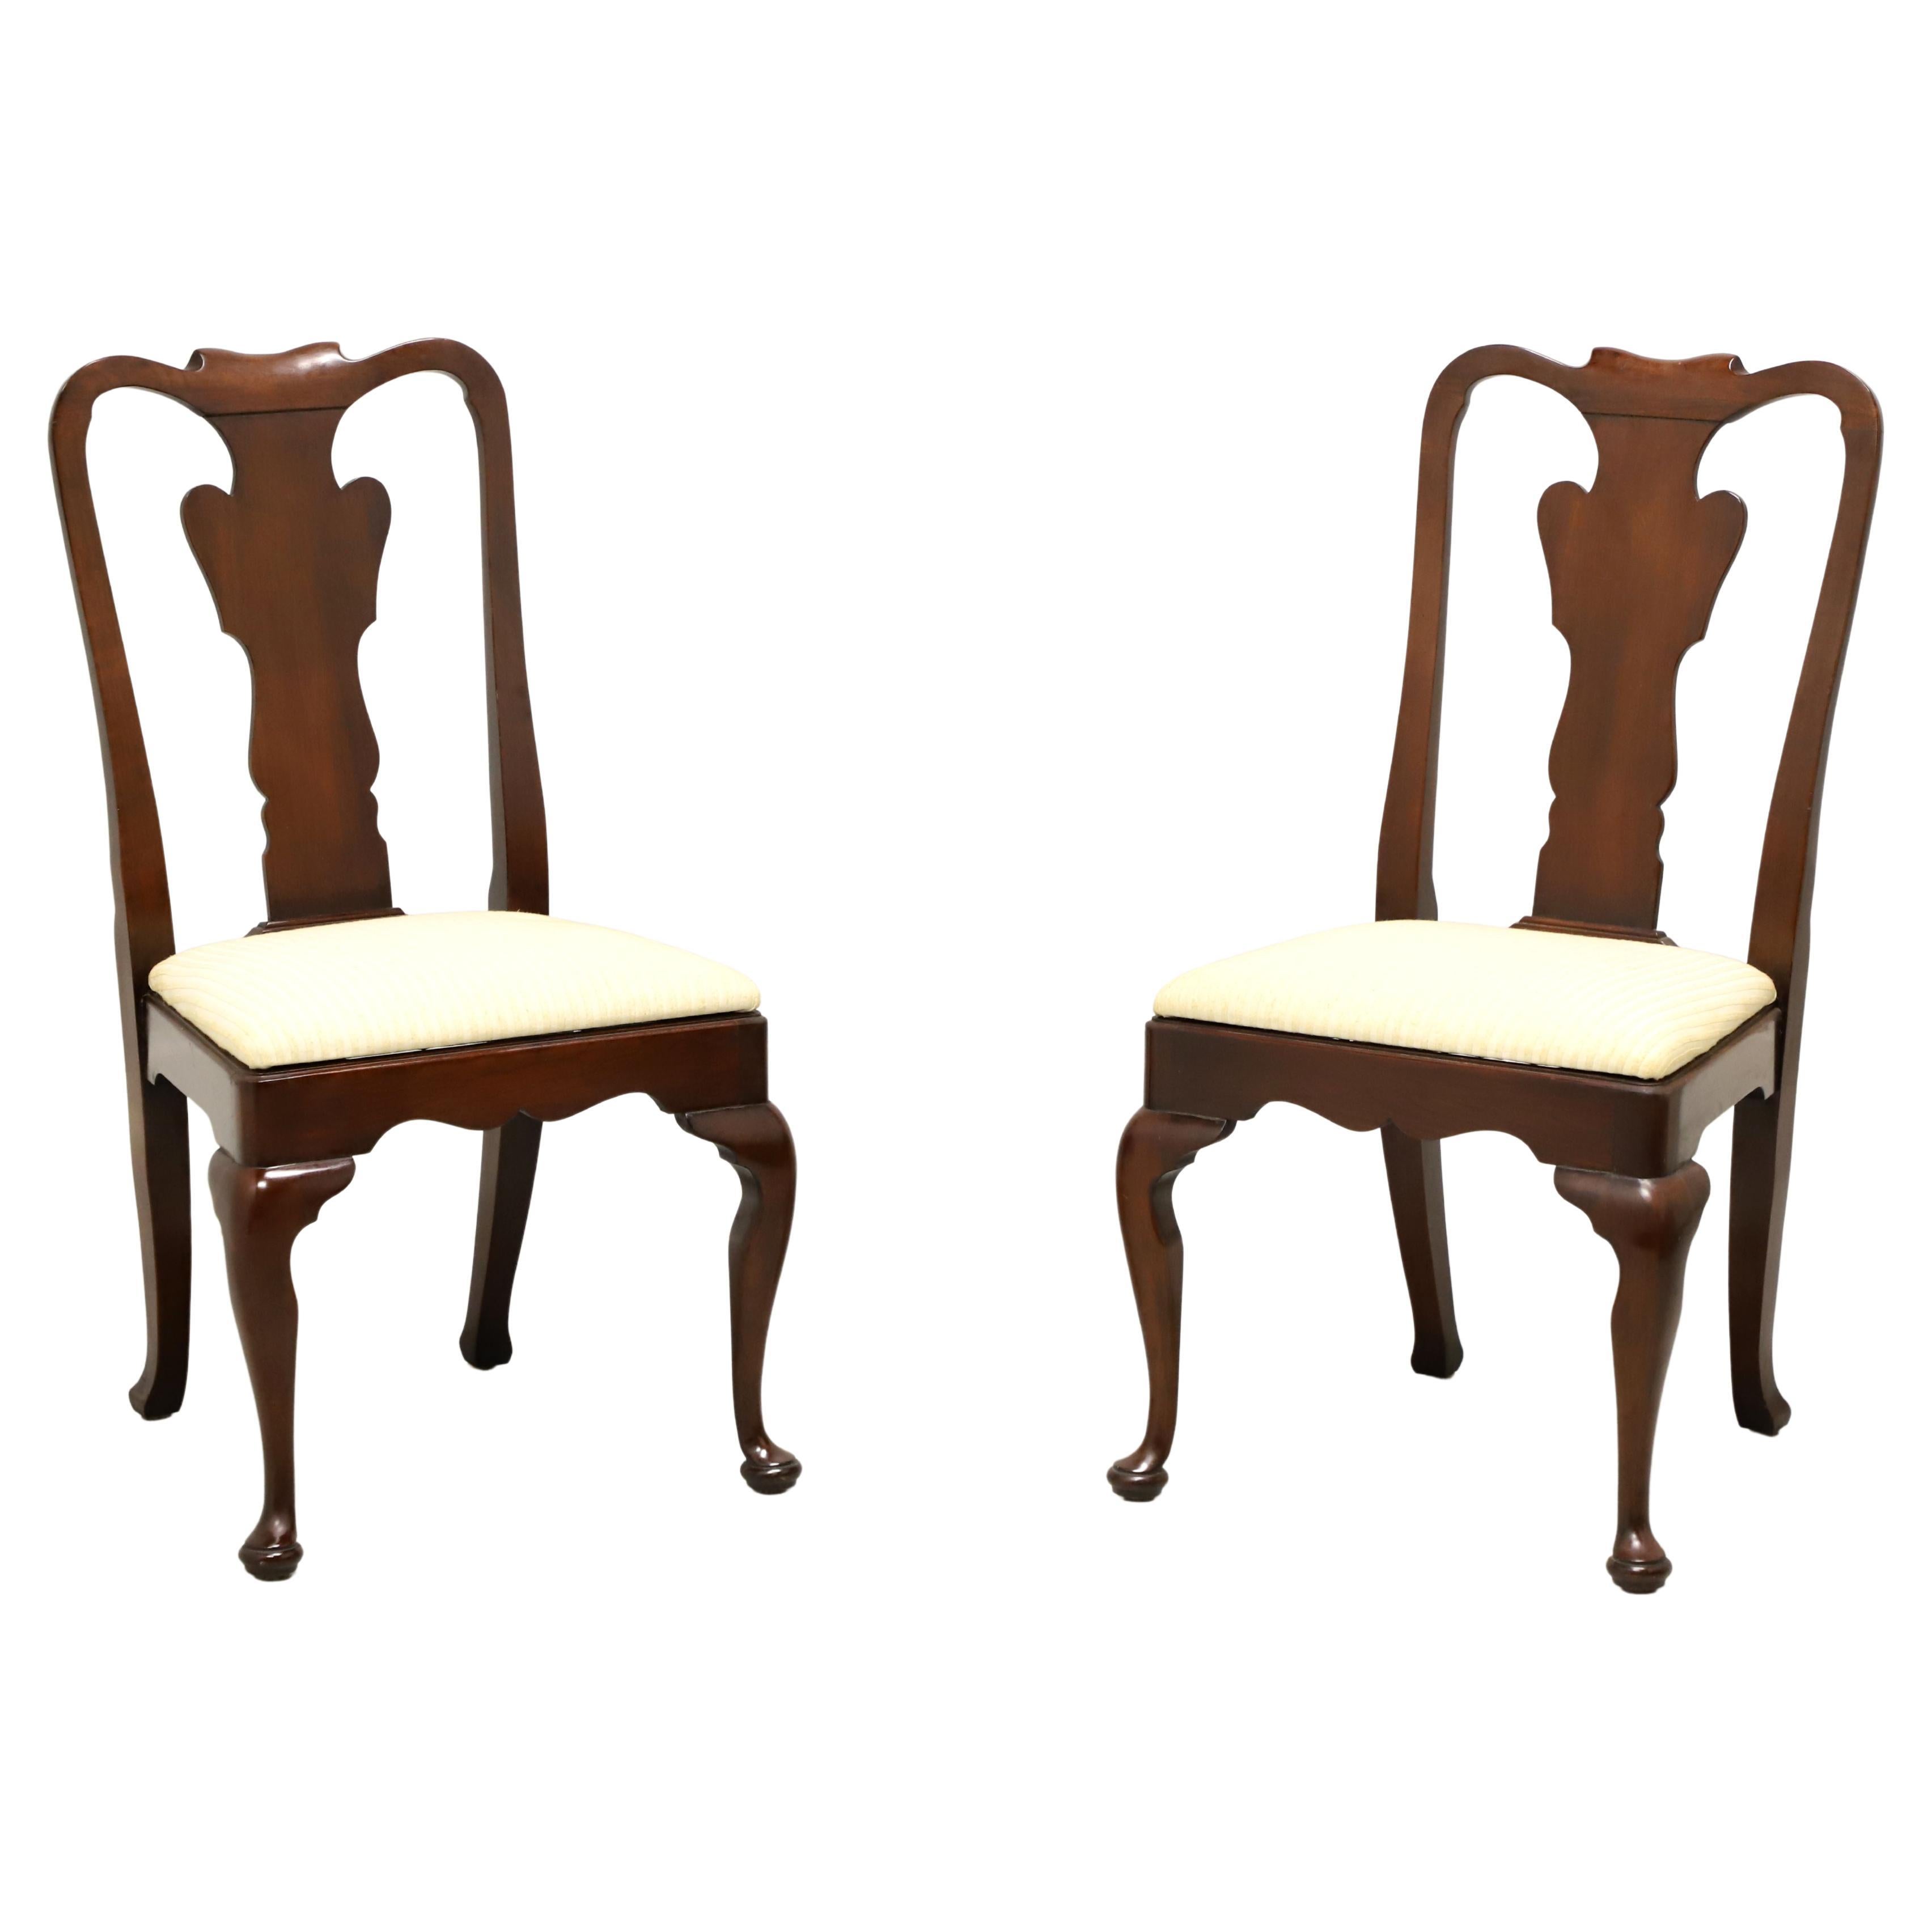 STATTON Old Towne Cherry Queen Anne Dining Side Chairs - Pair A For Sale